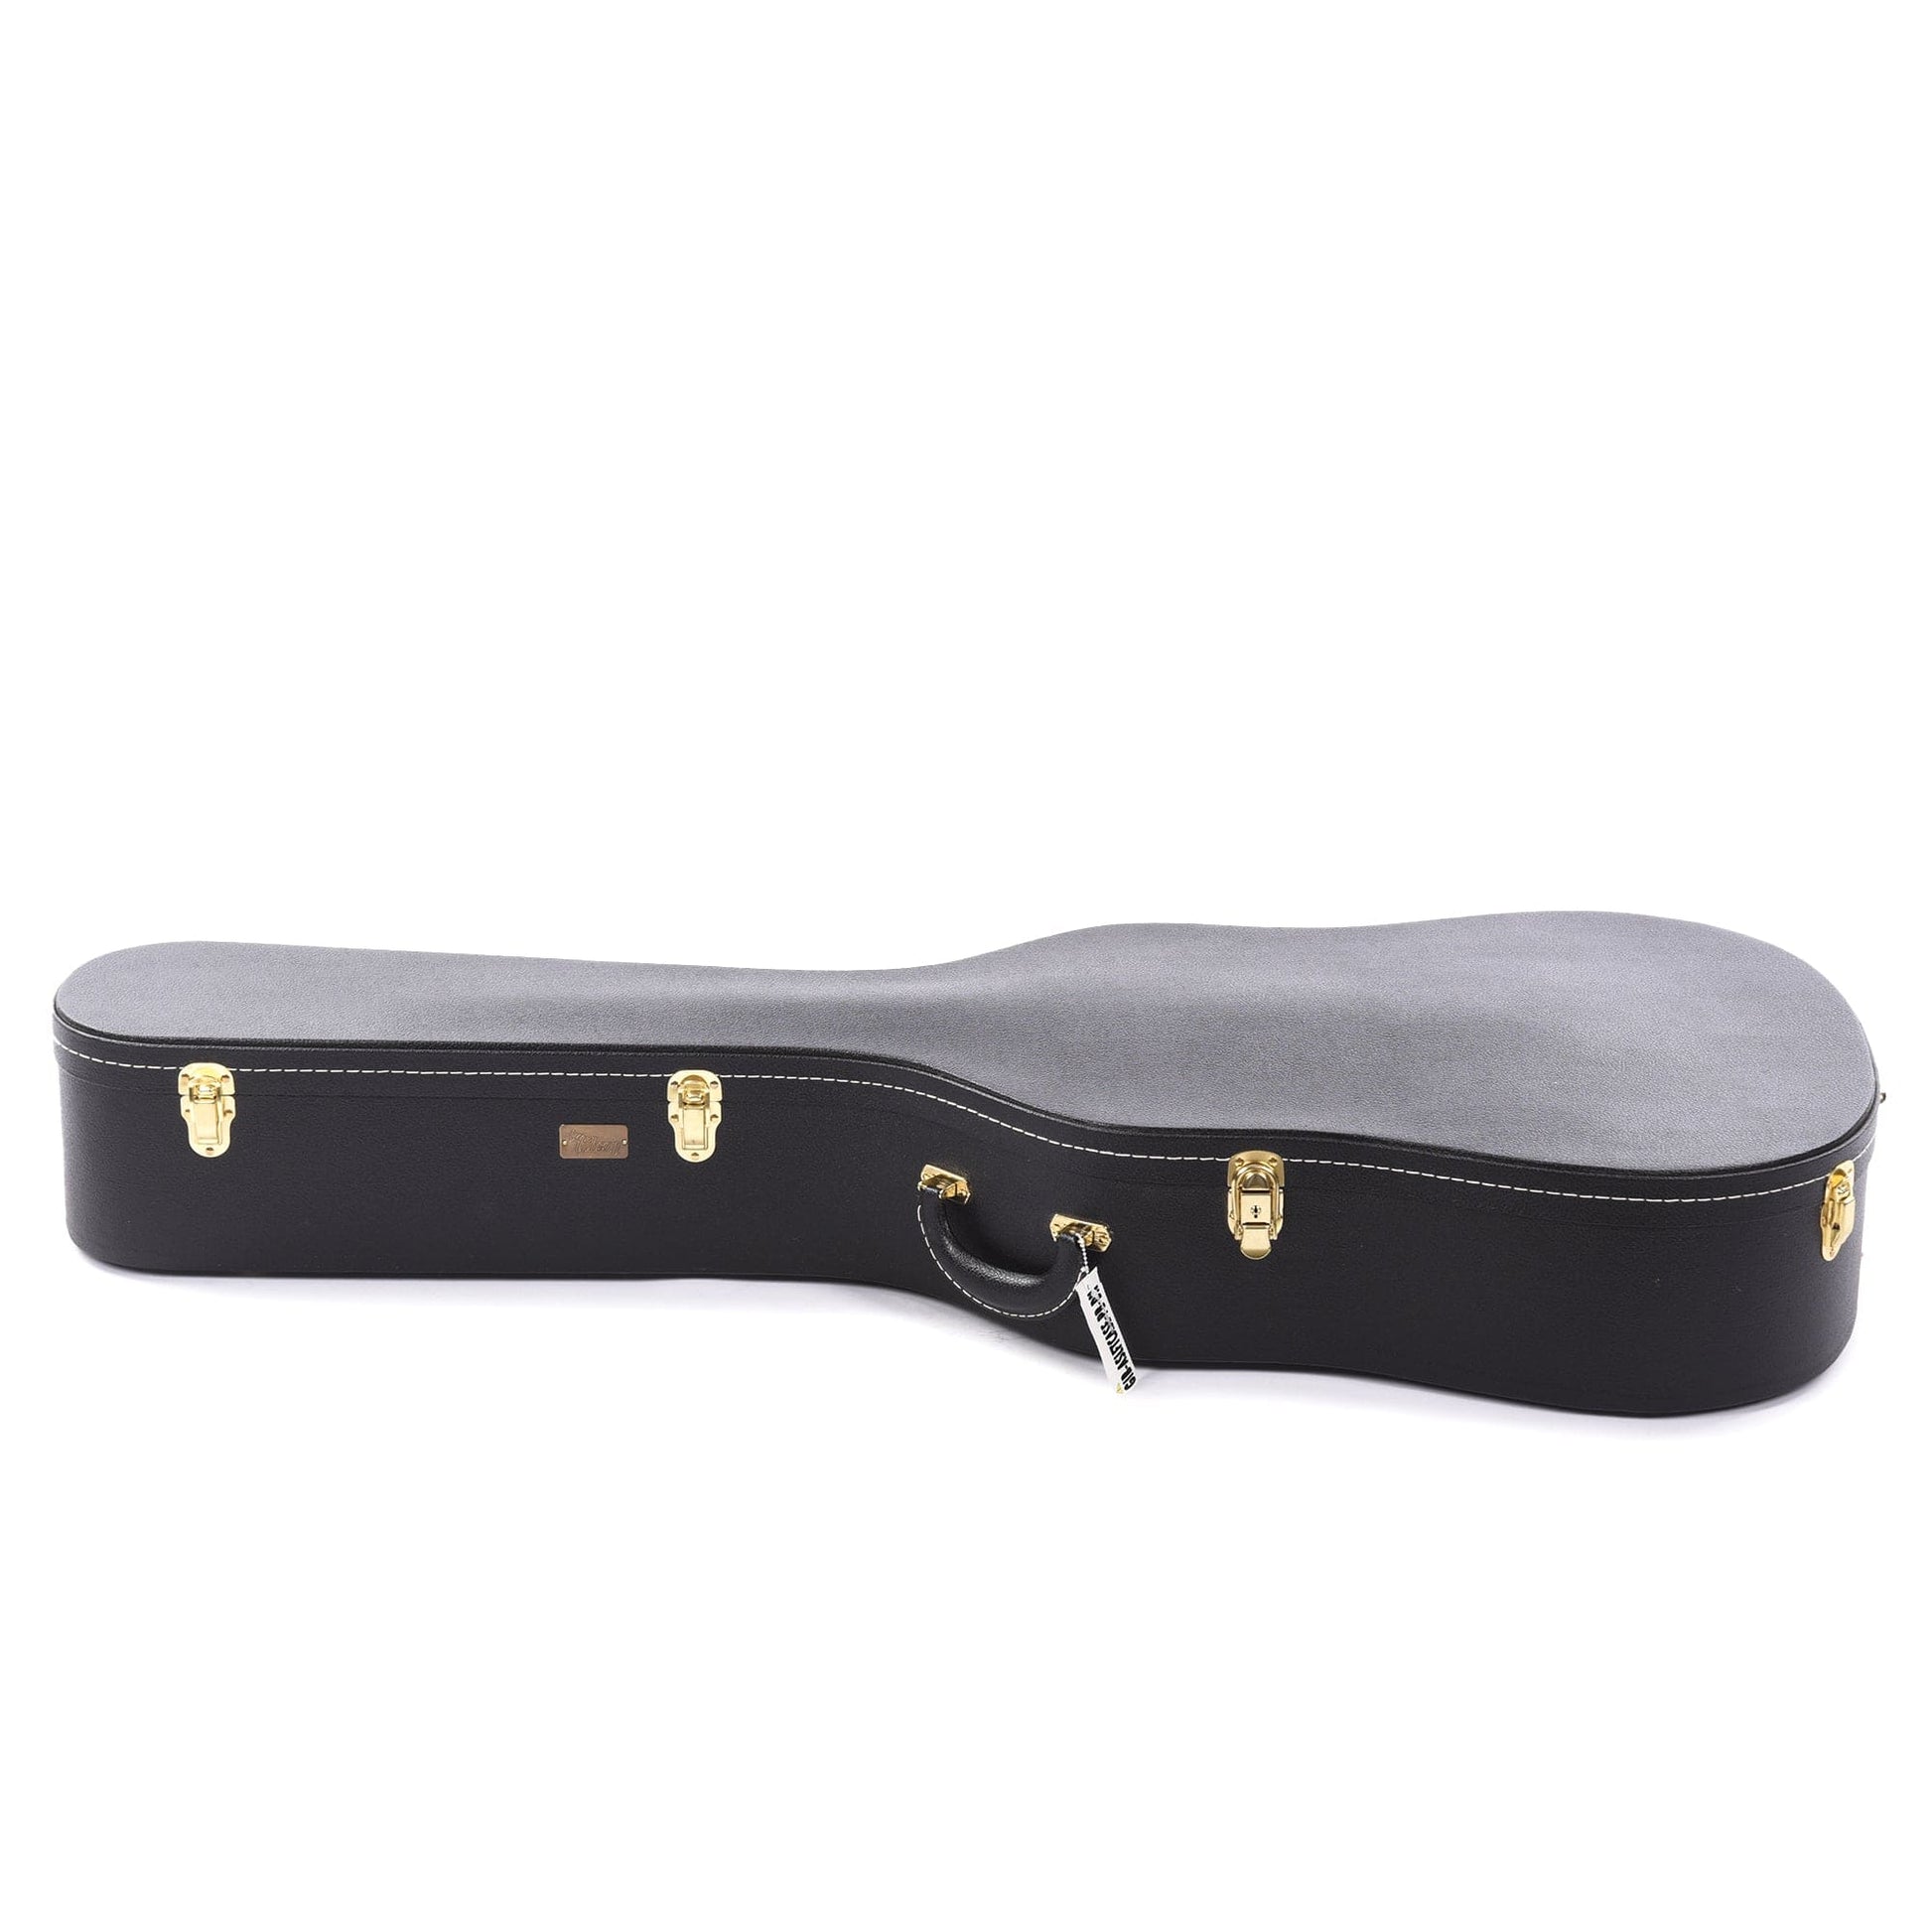 Lifton Historic Dreadnought Hardshell Case Black/Goldenrod Accessories / Cases and Gig Bags / Guitar Cases